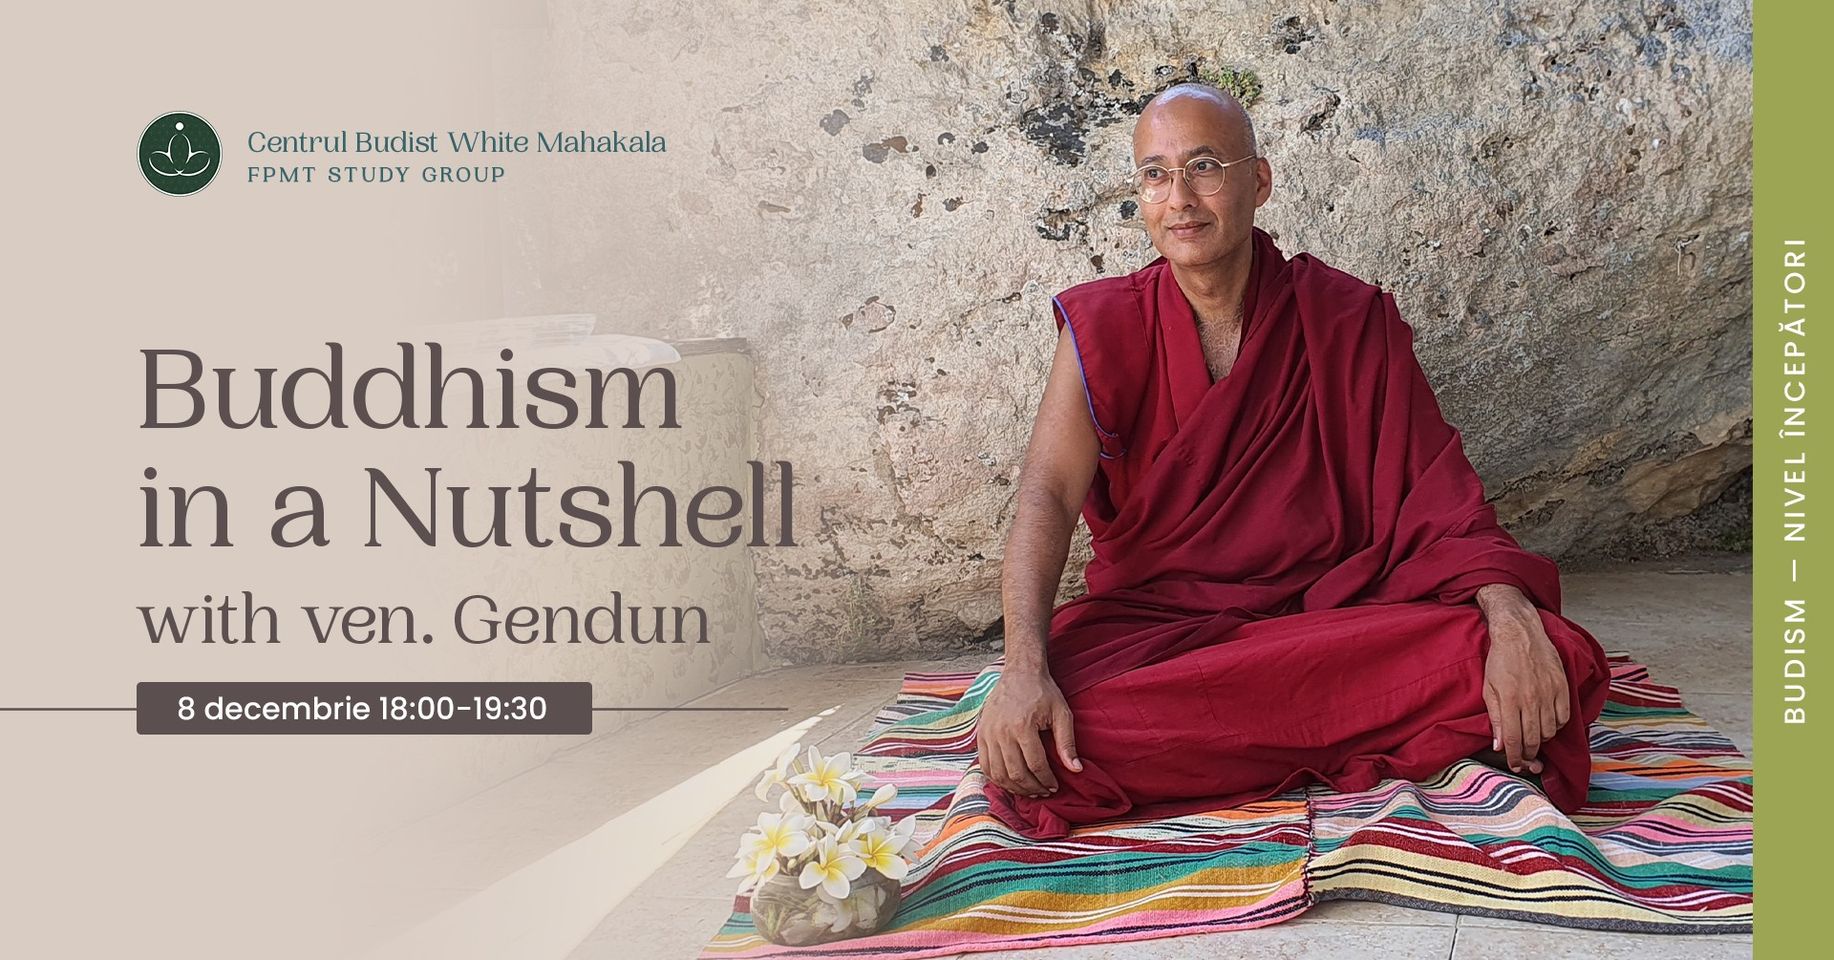 Buddhism in a Nutshell – The Buddha and His Teachings (session 1)